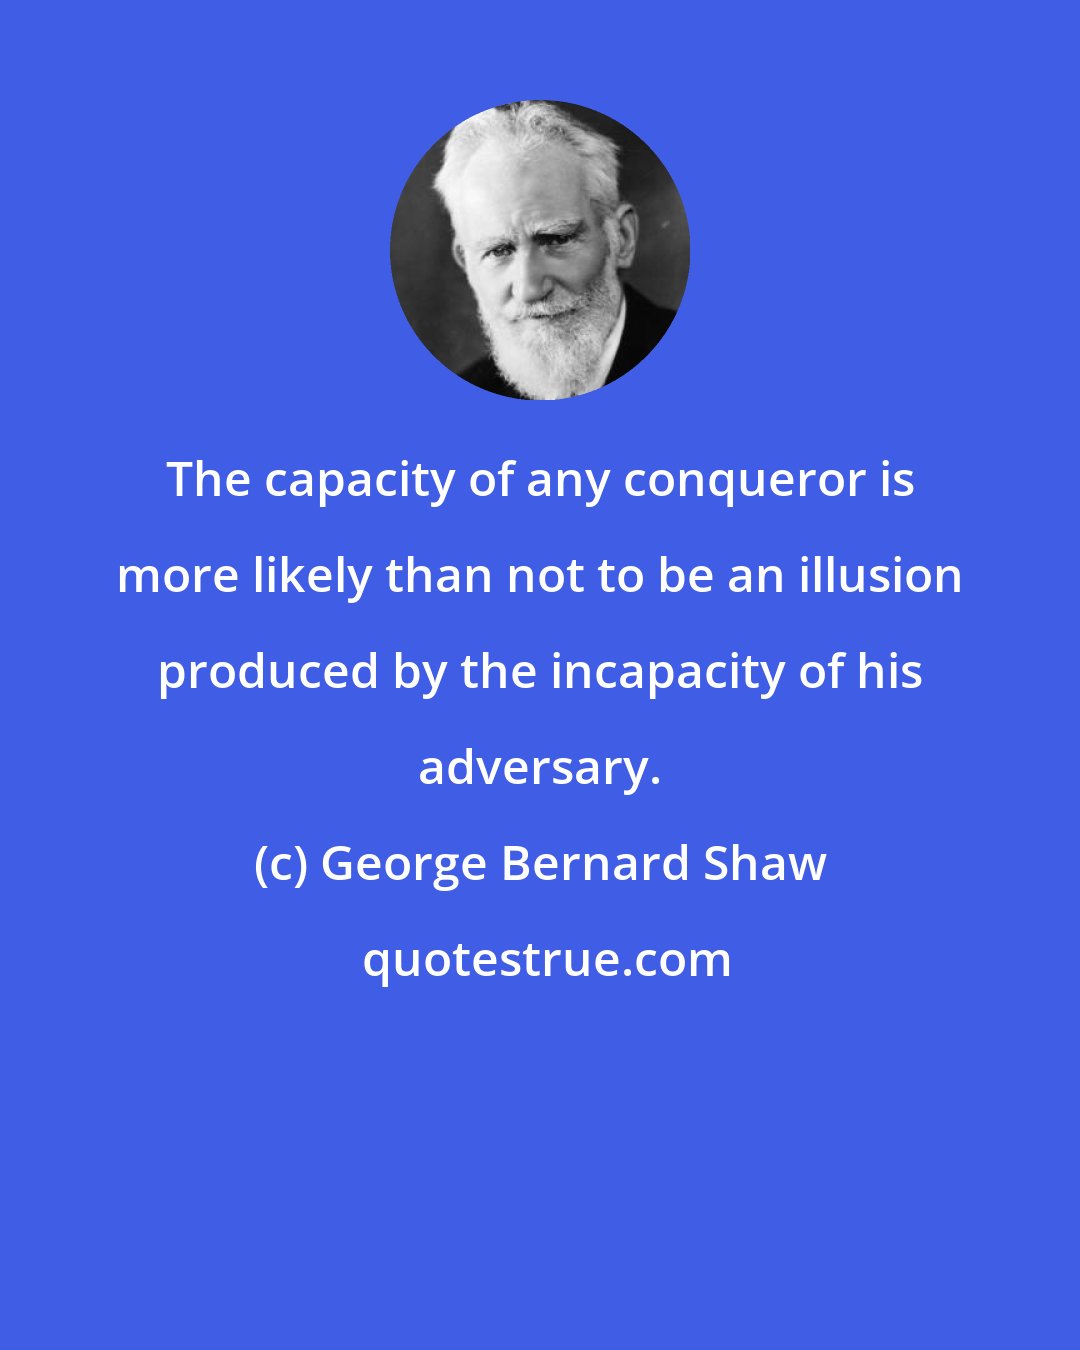 George Bernard Shaw: The capacity of any conqueror is more likely than not to be an illusion produced by the incapacity of his adversary.